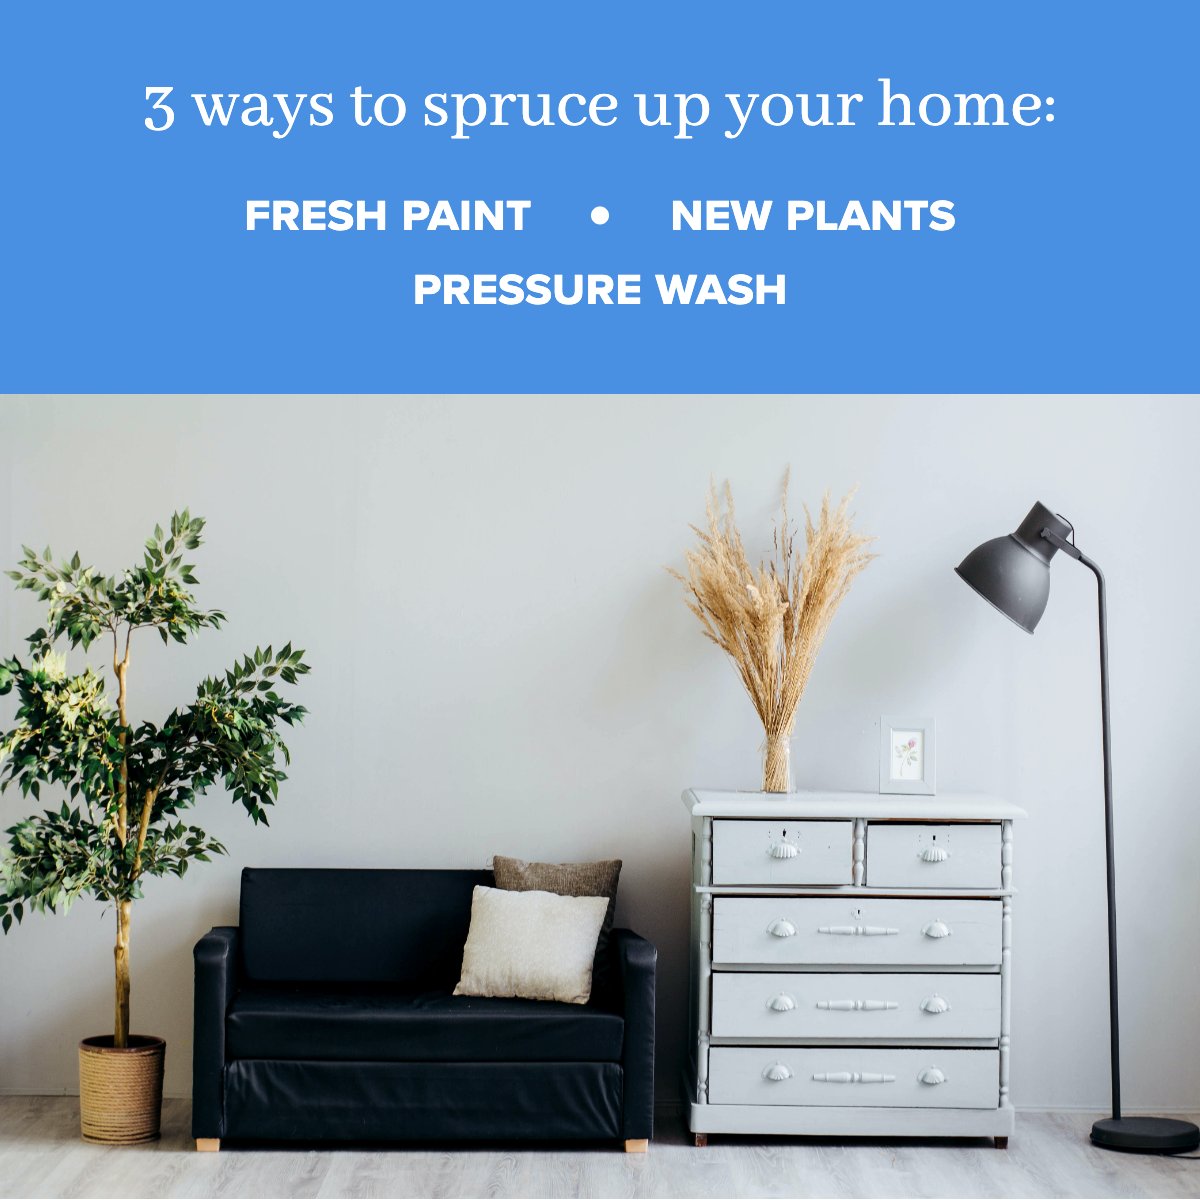 The best wats to spruce your home up this year! 😎

#Modern #design #home #realestate
 #BroughtonProperties #518 #KWRI #KWRN #SaratogaNY #HudsonNY #UpstateNY #KWBroughtonProperties #UpstateLuxuryProperties #UpstateNYLuxury #LuxuryHomes #TroyNY #KWRainbowNetwork